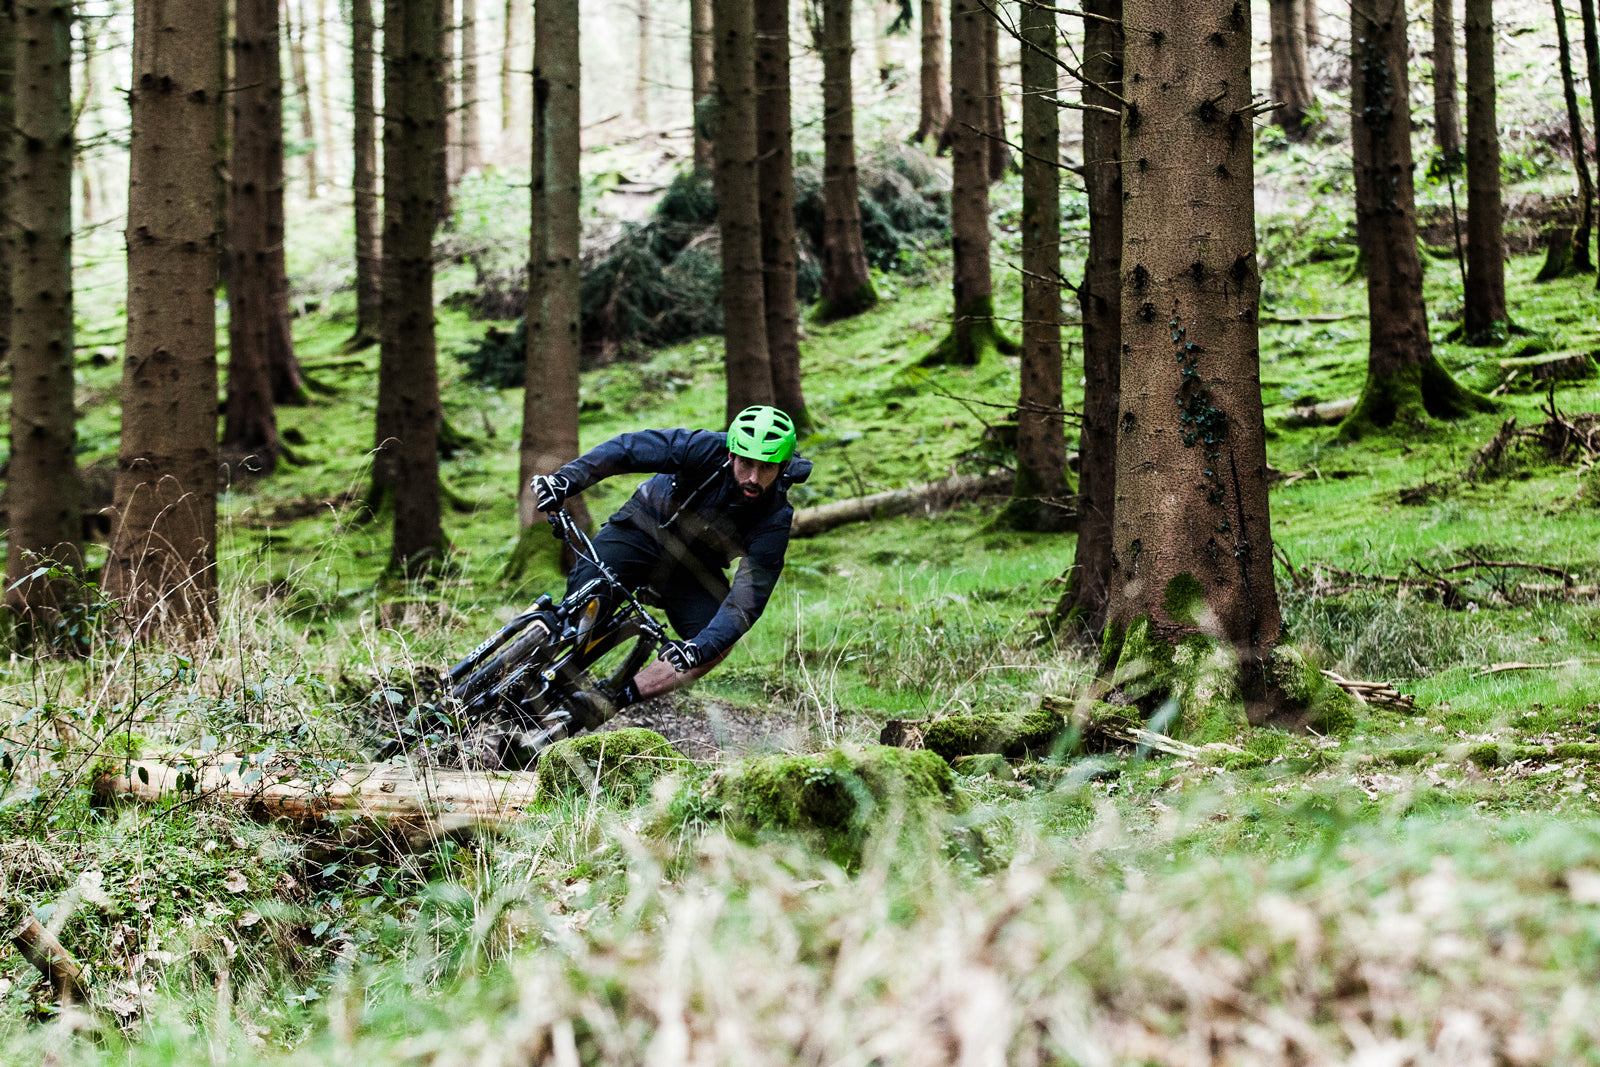 Mission Workshop Field Test : Acre > Wales - Field test with Dirt Magazine - a ride in UK - featuring Dirt Magazine, Santa Cruz Bicycles, SRAM